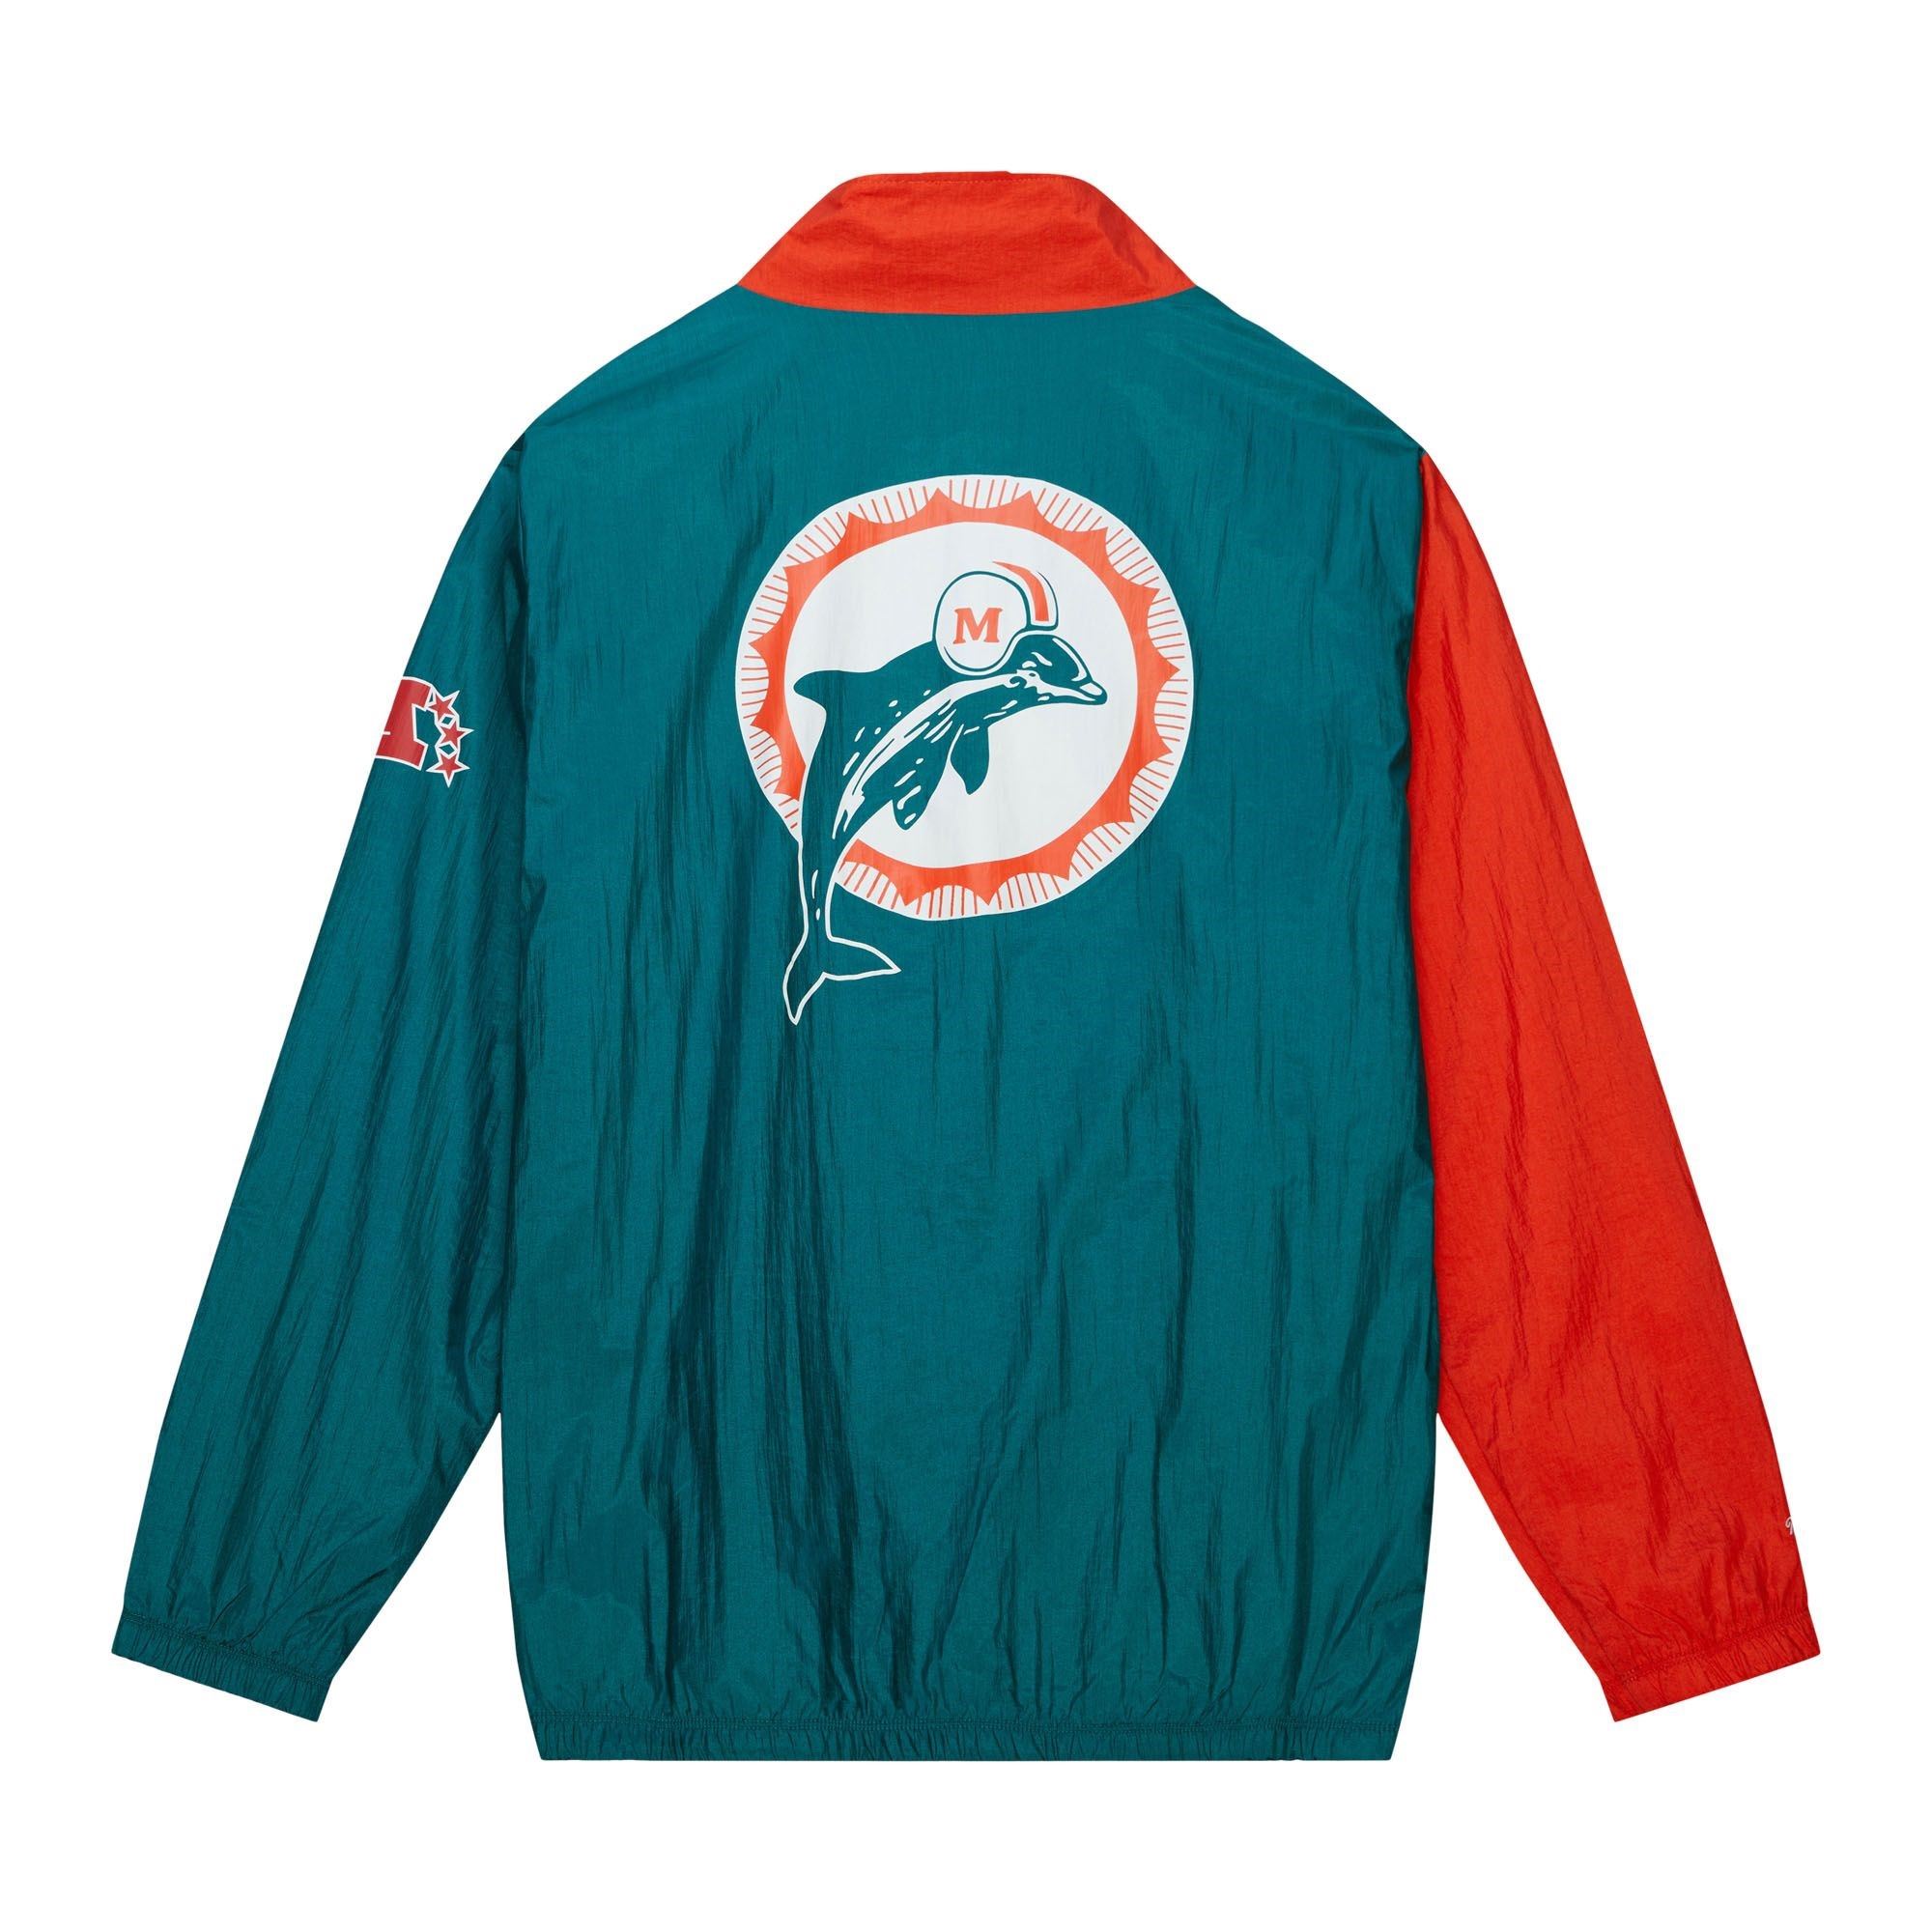 Miami Dolphins NFL Arched Retro Lined Windbreaker Turquoise Orange Jacke Mitchell & Ness